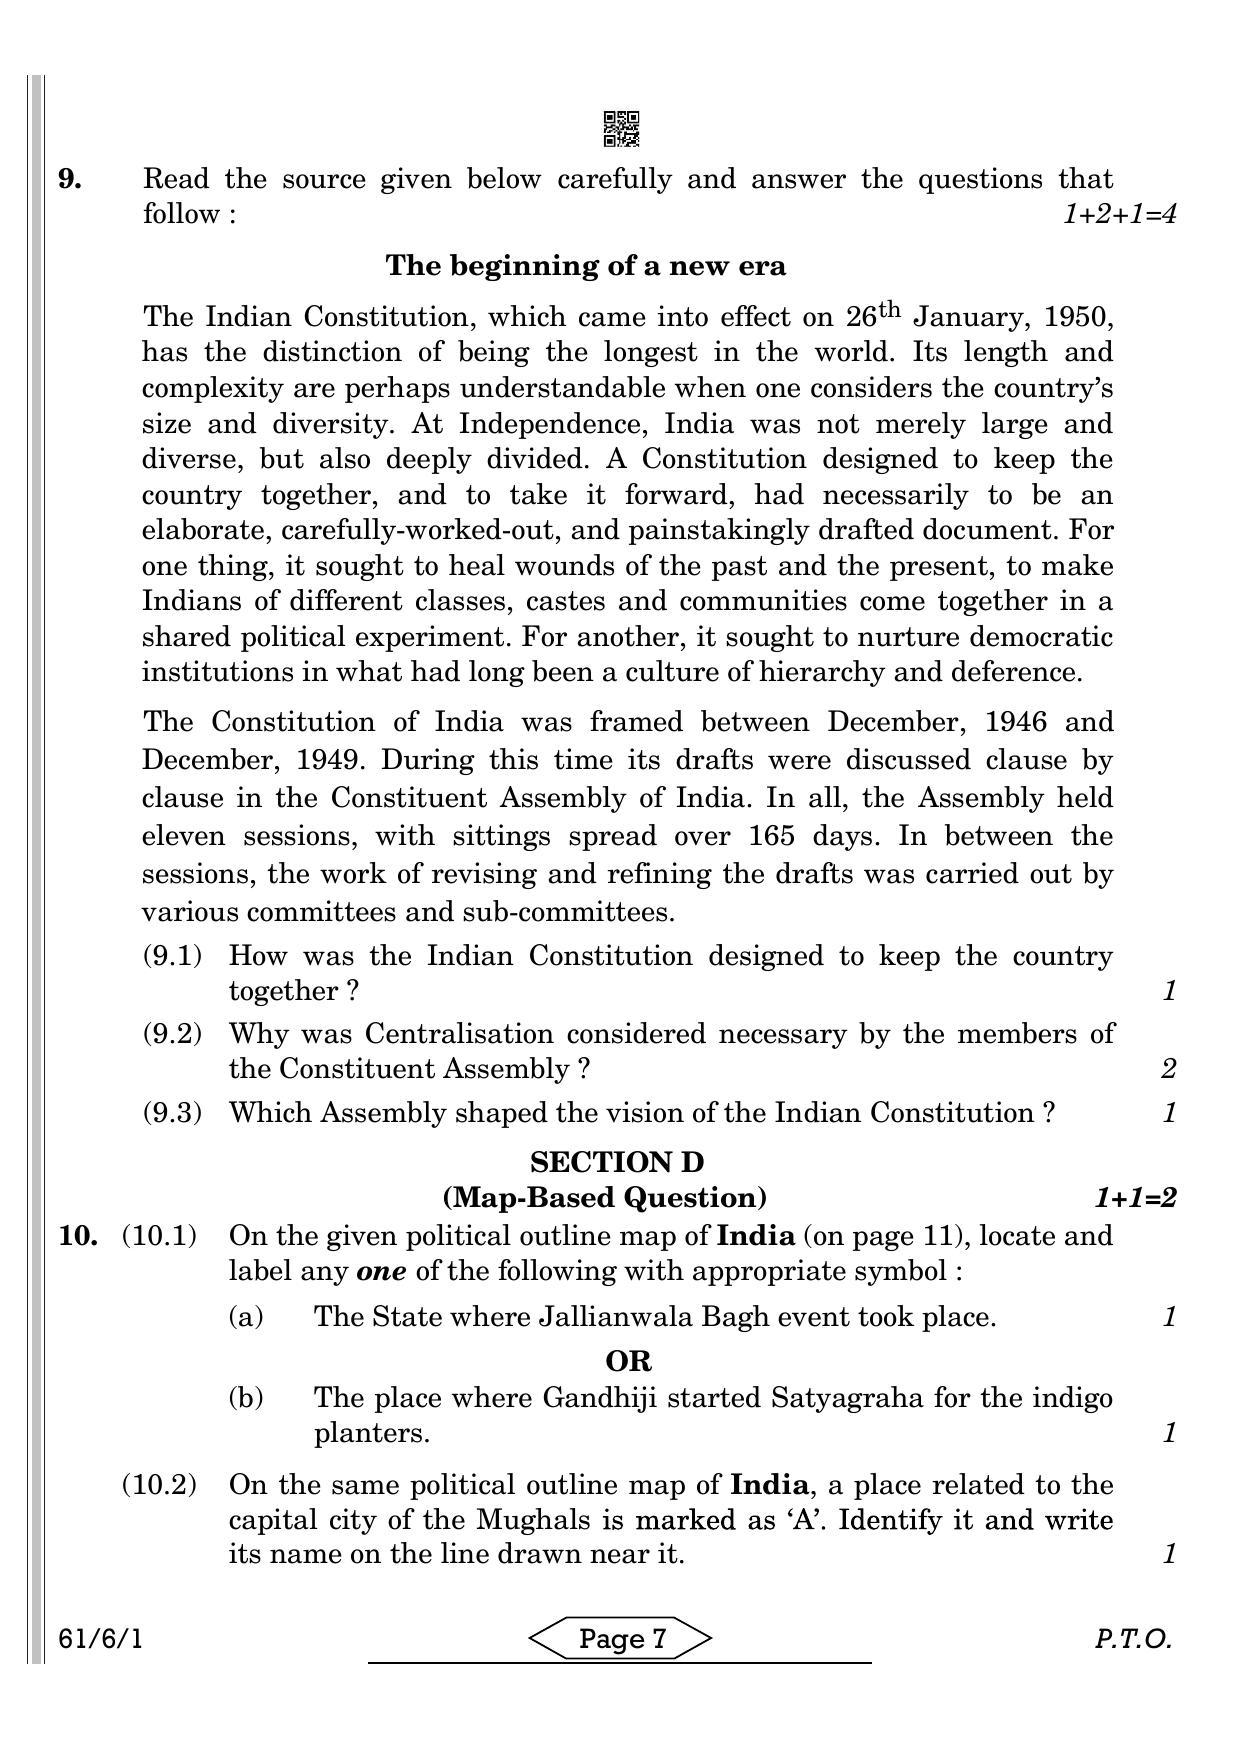 CBSE Class 12 61-6-1 HISTORY 2022 Compartment Question Paper - Page 7